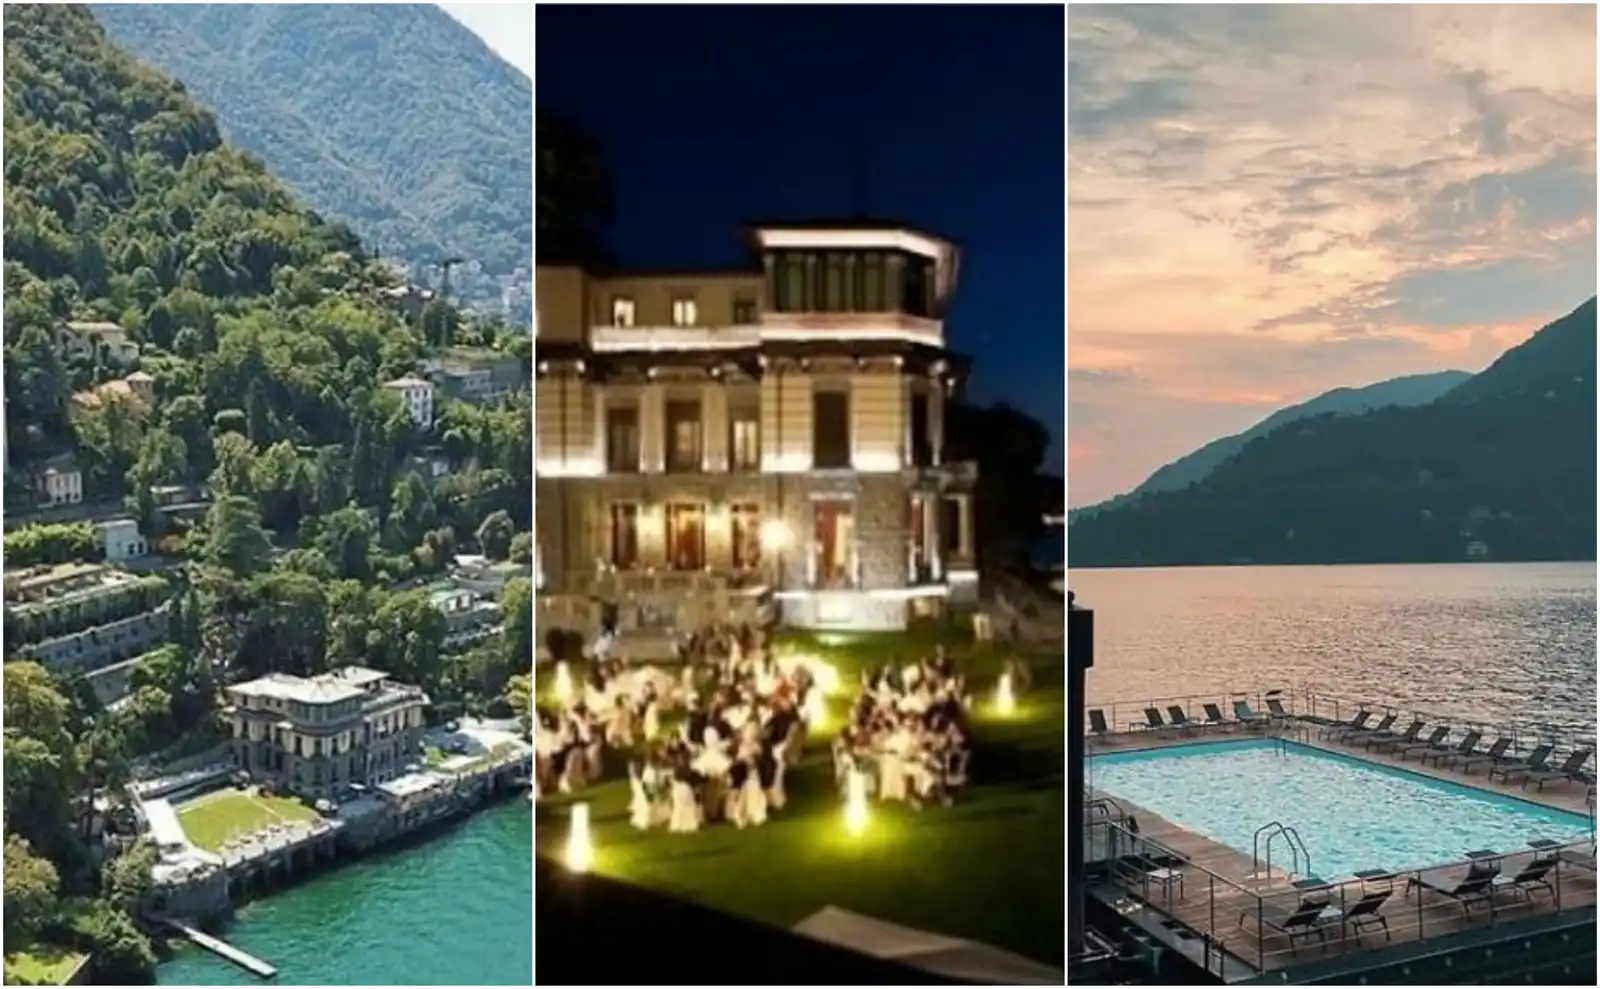 DeepVeer Wedding Location Not in Vila Del, But Might be In this Gorgeous Resort